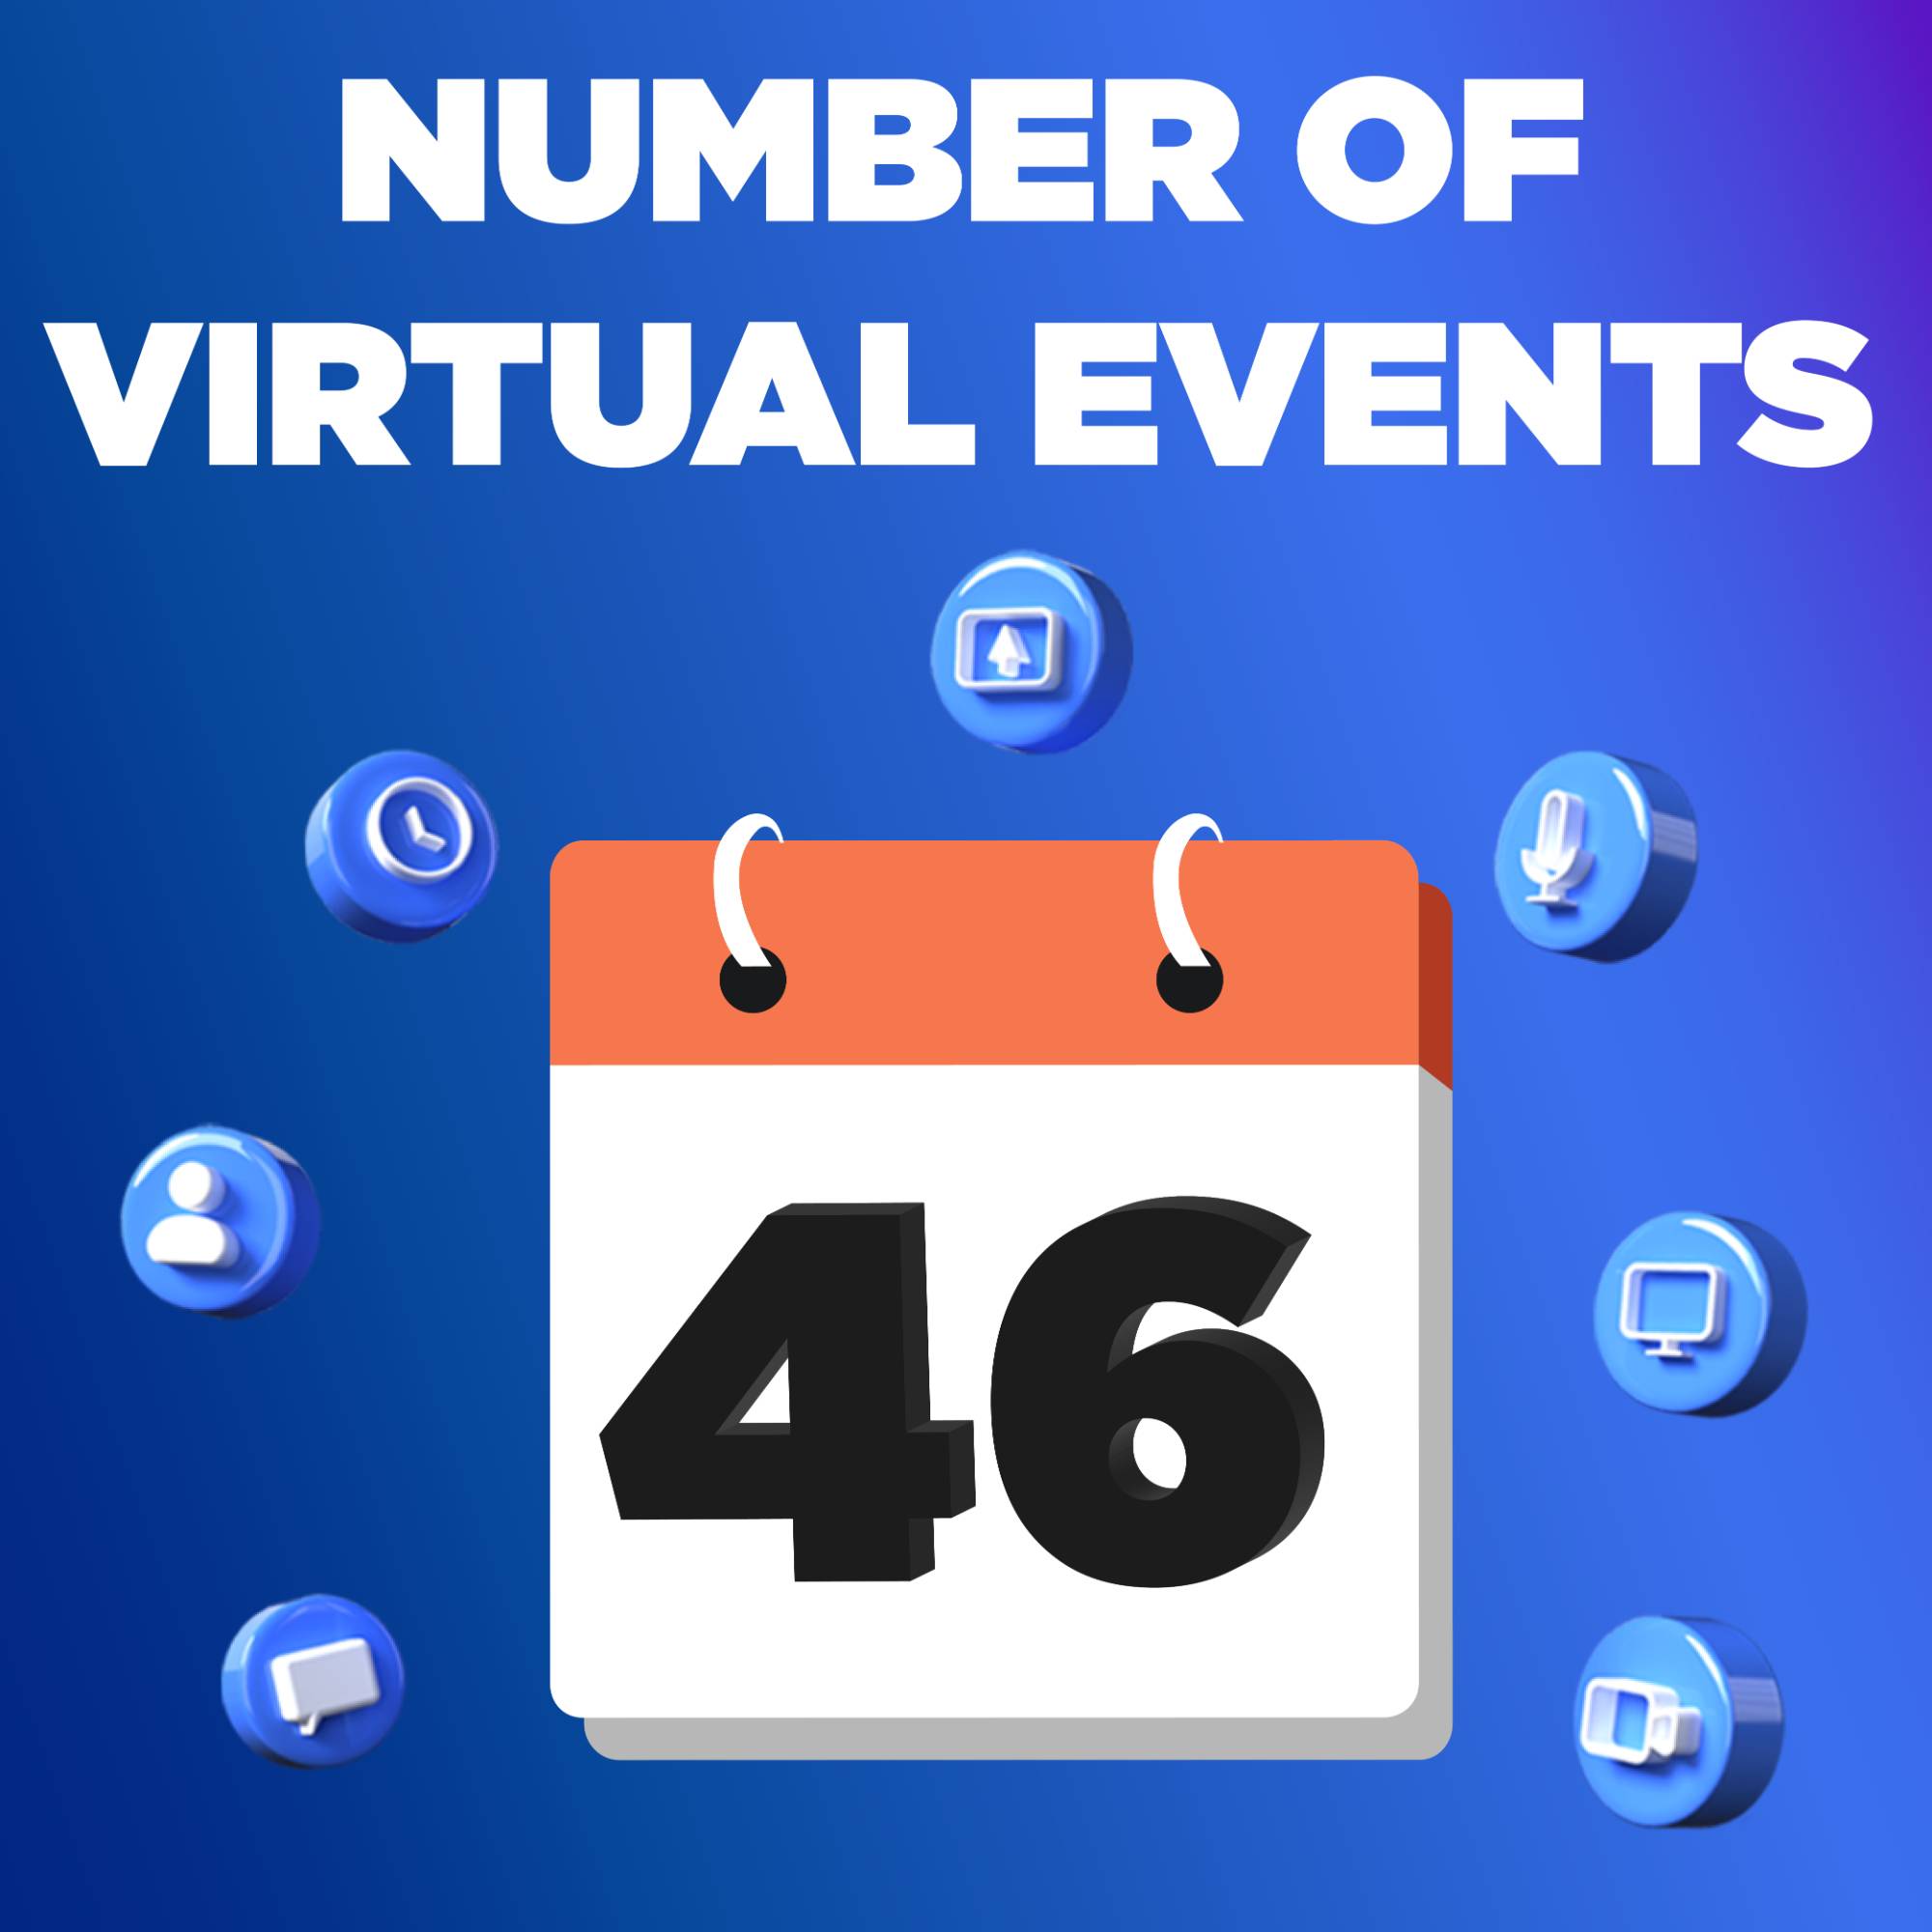 There have a total of 46 virtual events hosted by the GVSU Alumni Association.